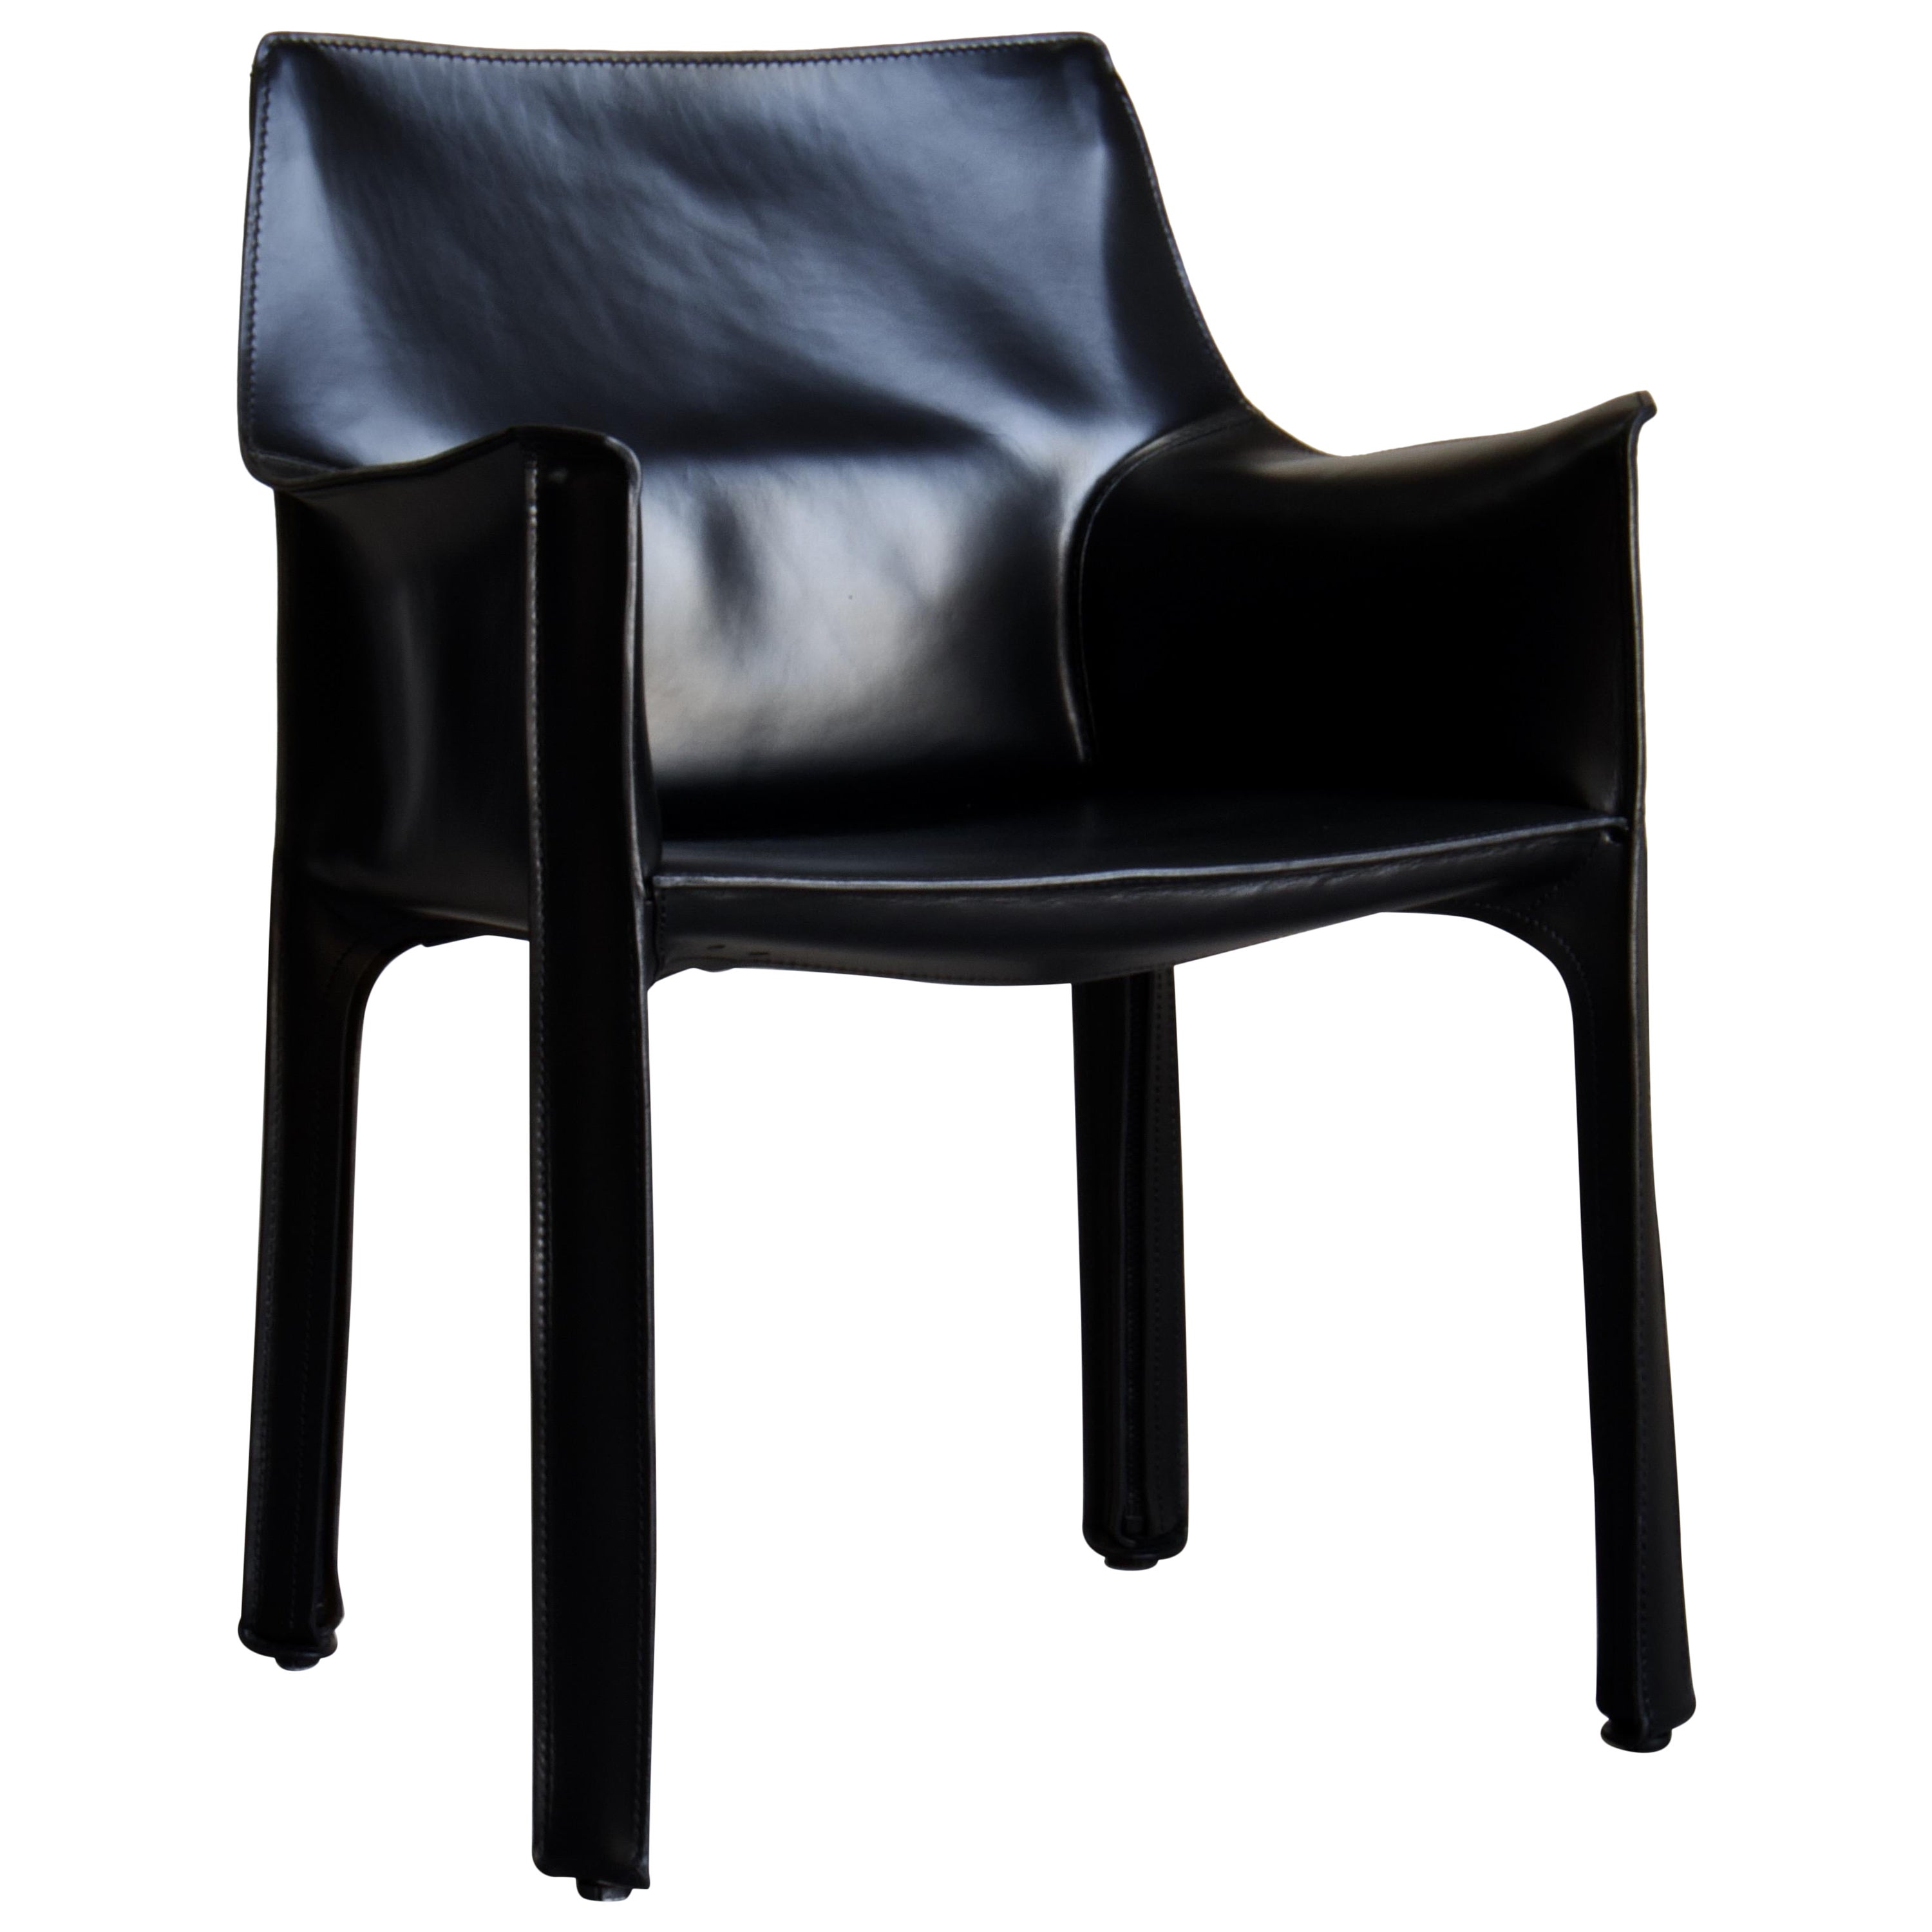 6 Mario Bellini CAB 413 Armchairs in Black Leather for Cassina, 1980s Italy For Sale